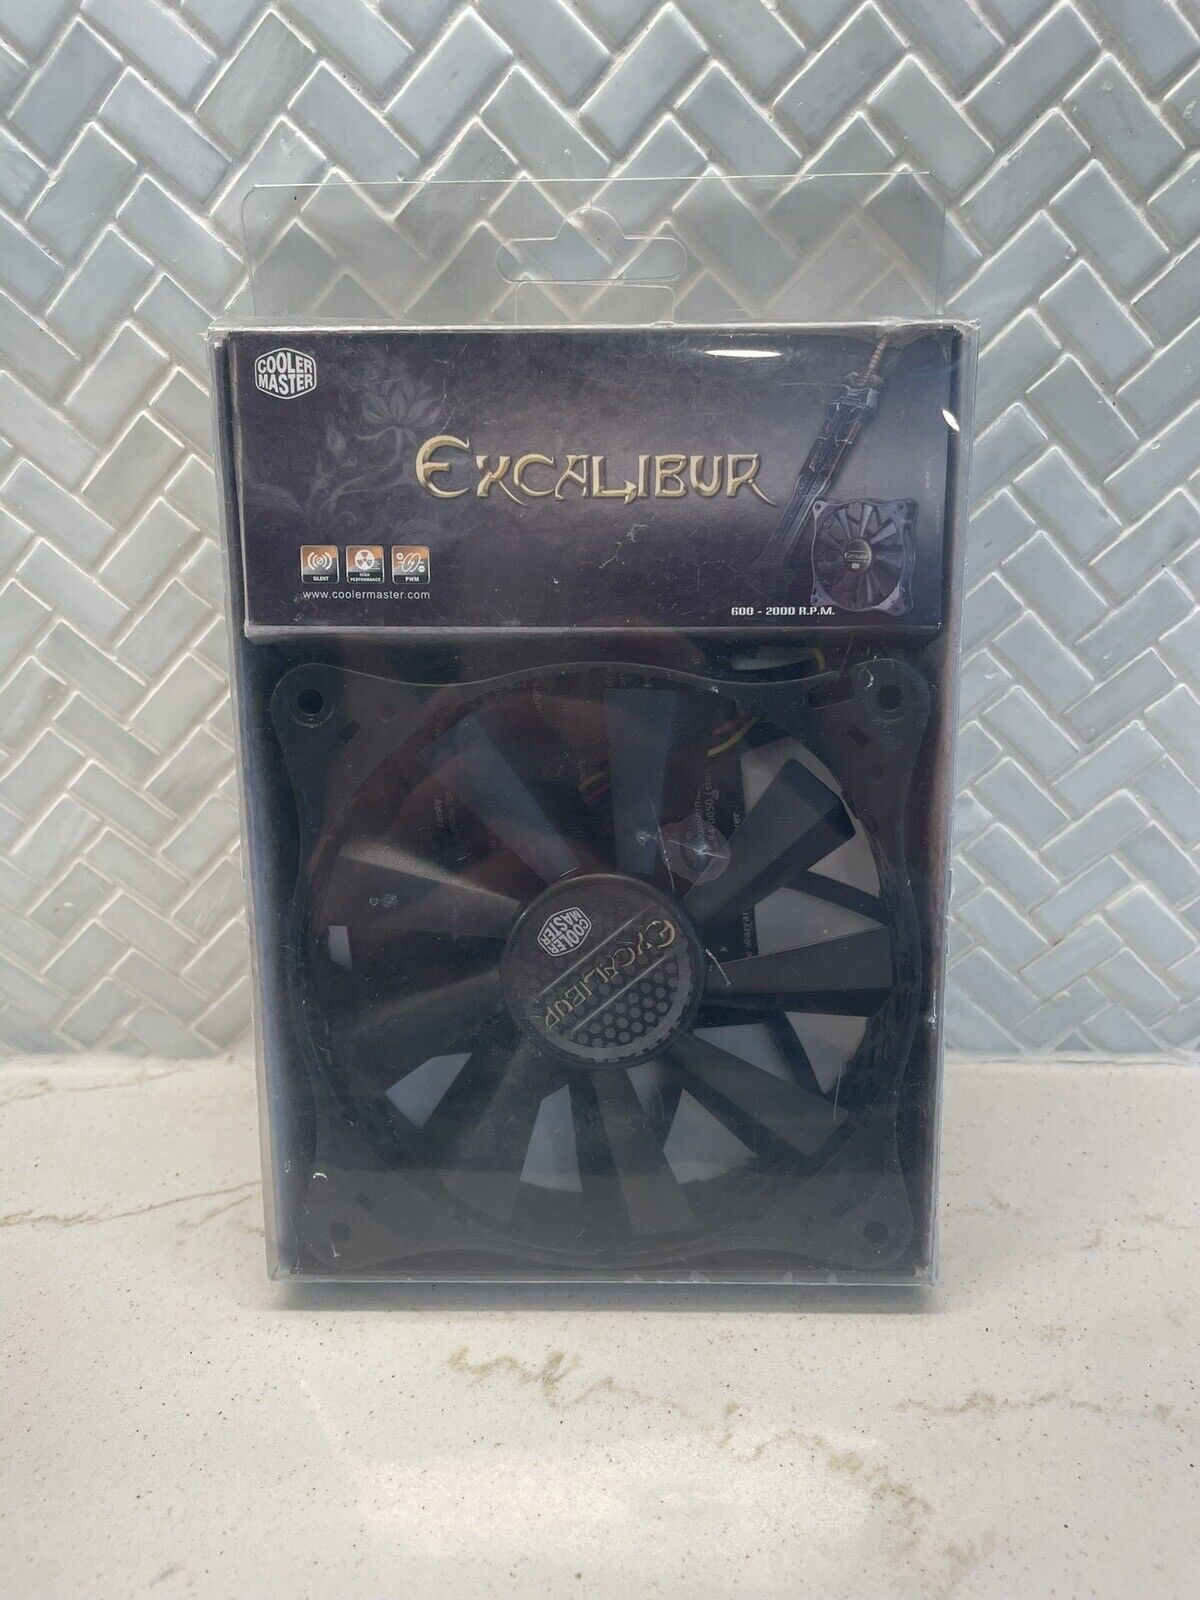 Cooler Master Excalibur R4-EXBB-20PK 600-2000 RPM PC Fan New Sealed Fast Ship